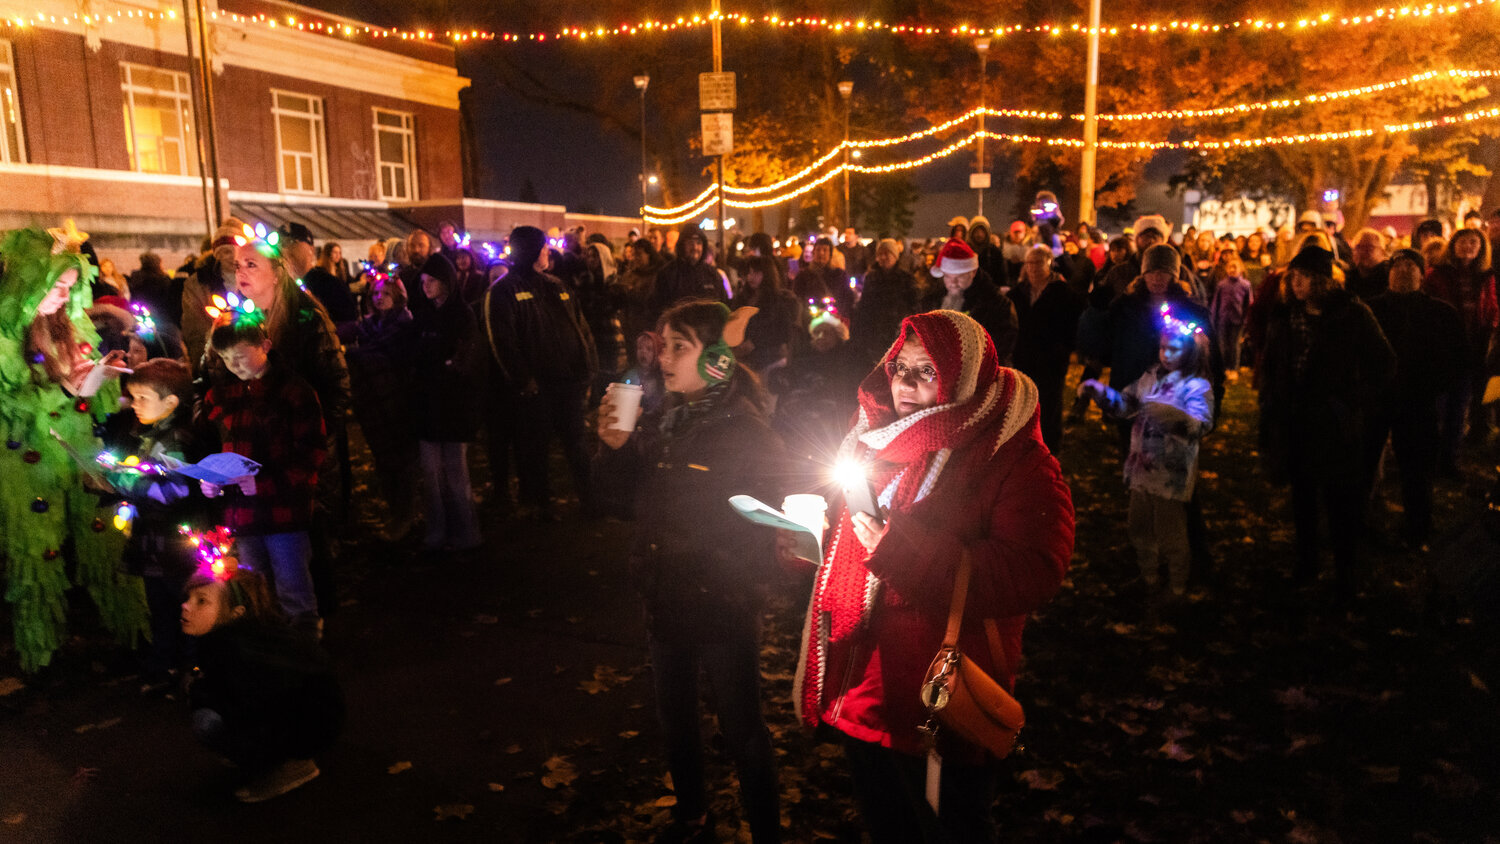 Crowds sing Christmas carols while waiting for Santa to arrive at George Washington Park in Centralia during a tree lighting ceremony on Friday, Nov. 24.